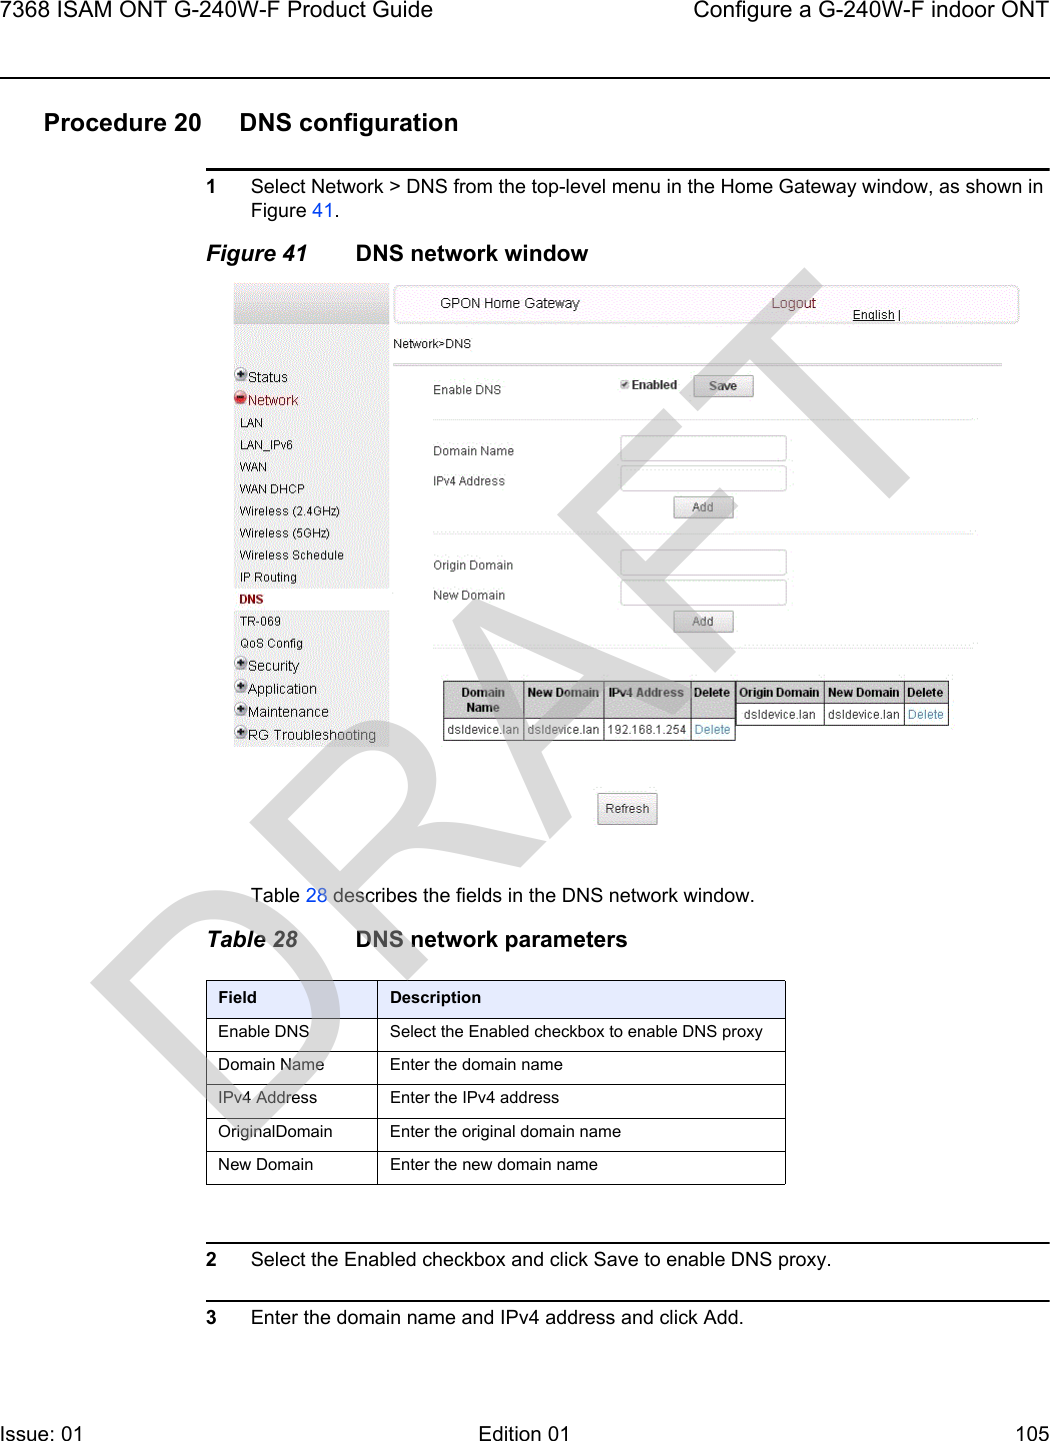 7368 ISAM ONT G-240W-F Product Guide Configure a G-240W-F indoor ONTIssue: 01 Edition 01 105 Procedure 20 DNS configuration1Select Network &gt; DNS from the top-level menu in the Home Gateway window, as shown in Figure 41.Figure 41 DNS network windowTable 28 describes the fields in the DNS network window.Table 28 DNS network parameters2Select the Enabled checkbox and click Save to enable DNS proxy.3Enter the domain name and IPv4 address and click Add.Field DescriptionEnable DNS Select the Enabled checkbox to enable DNS proxyDomain Name Enter the domain nameIPv4 Address Enter the IPv4 addressOriginalDomain Enter the original domain nameNew Domain Enter the new domain nameDRAFT